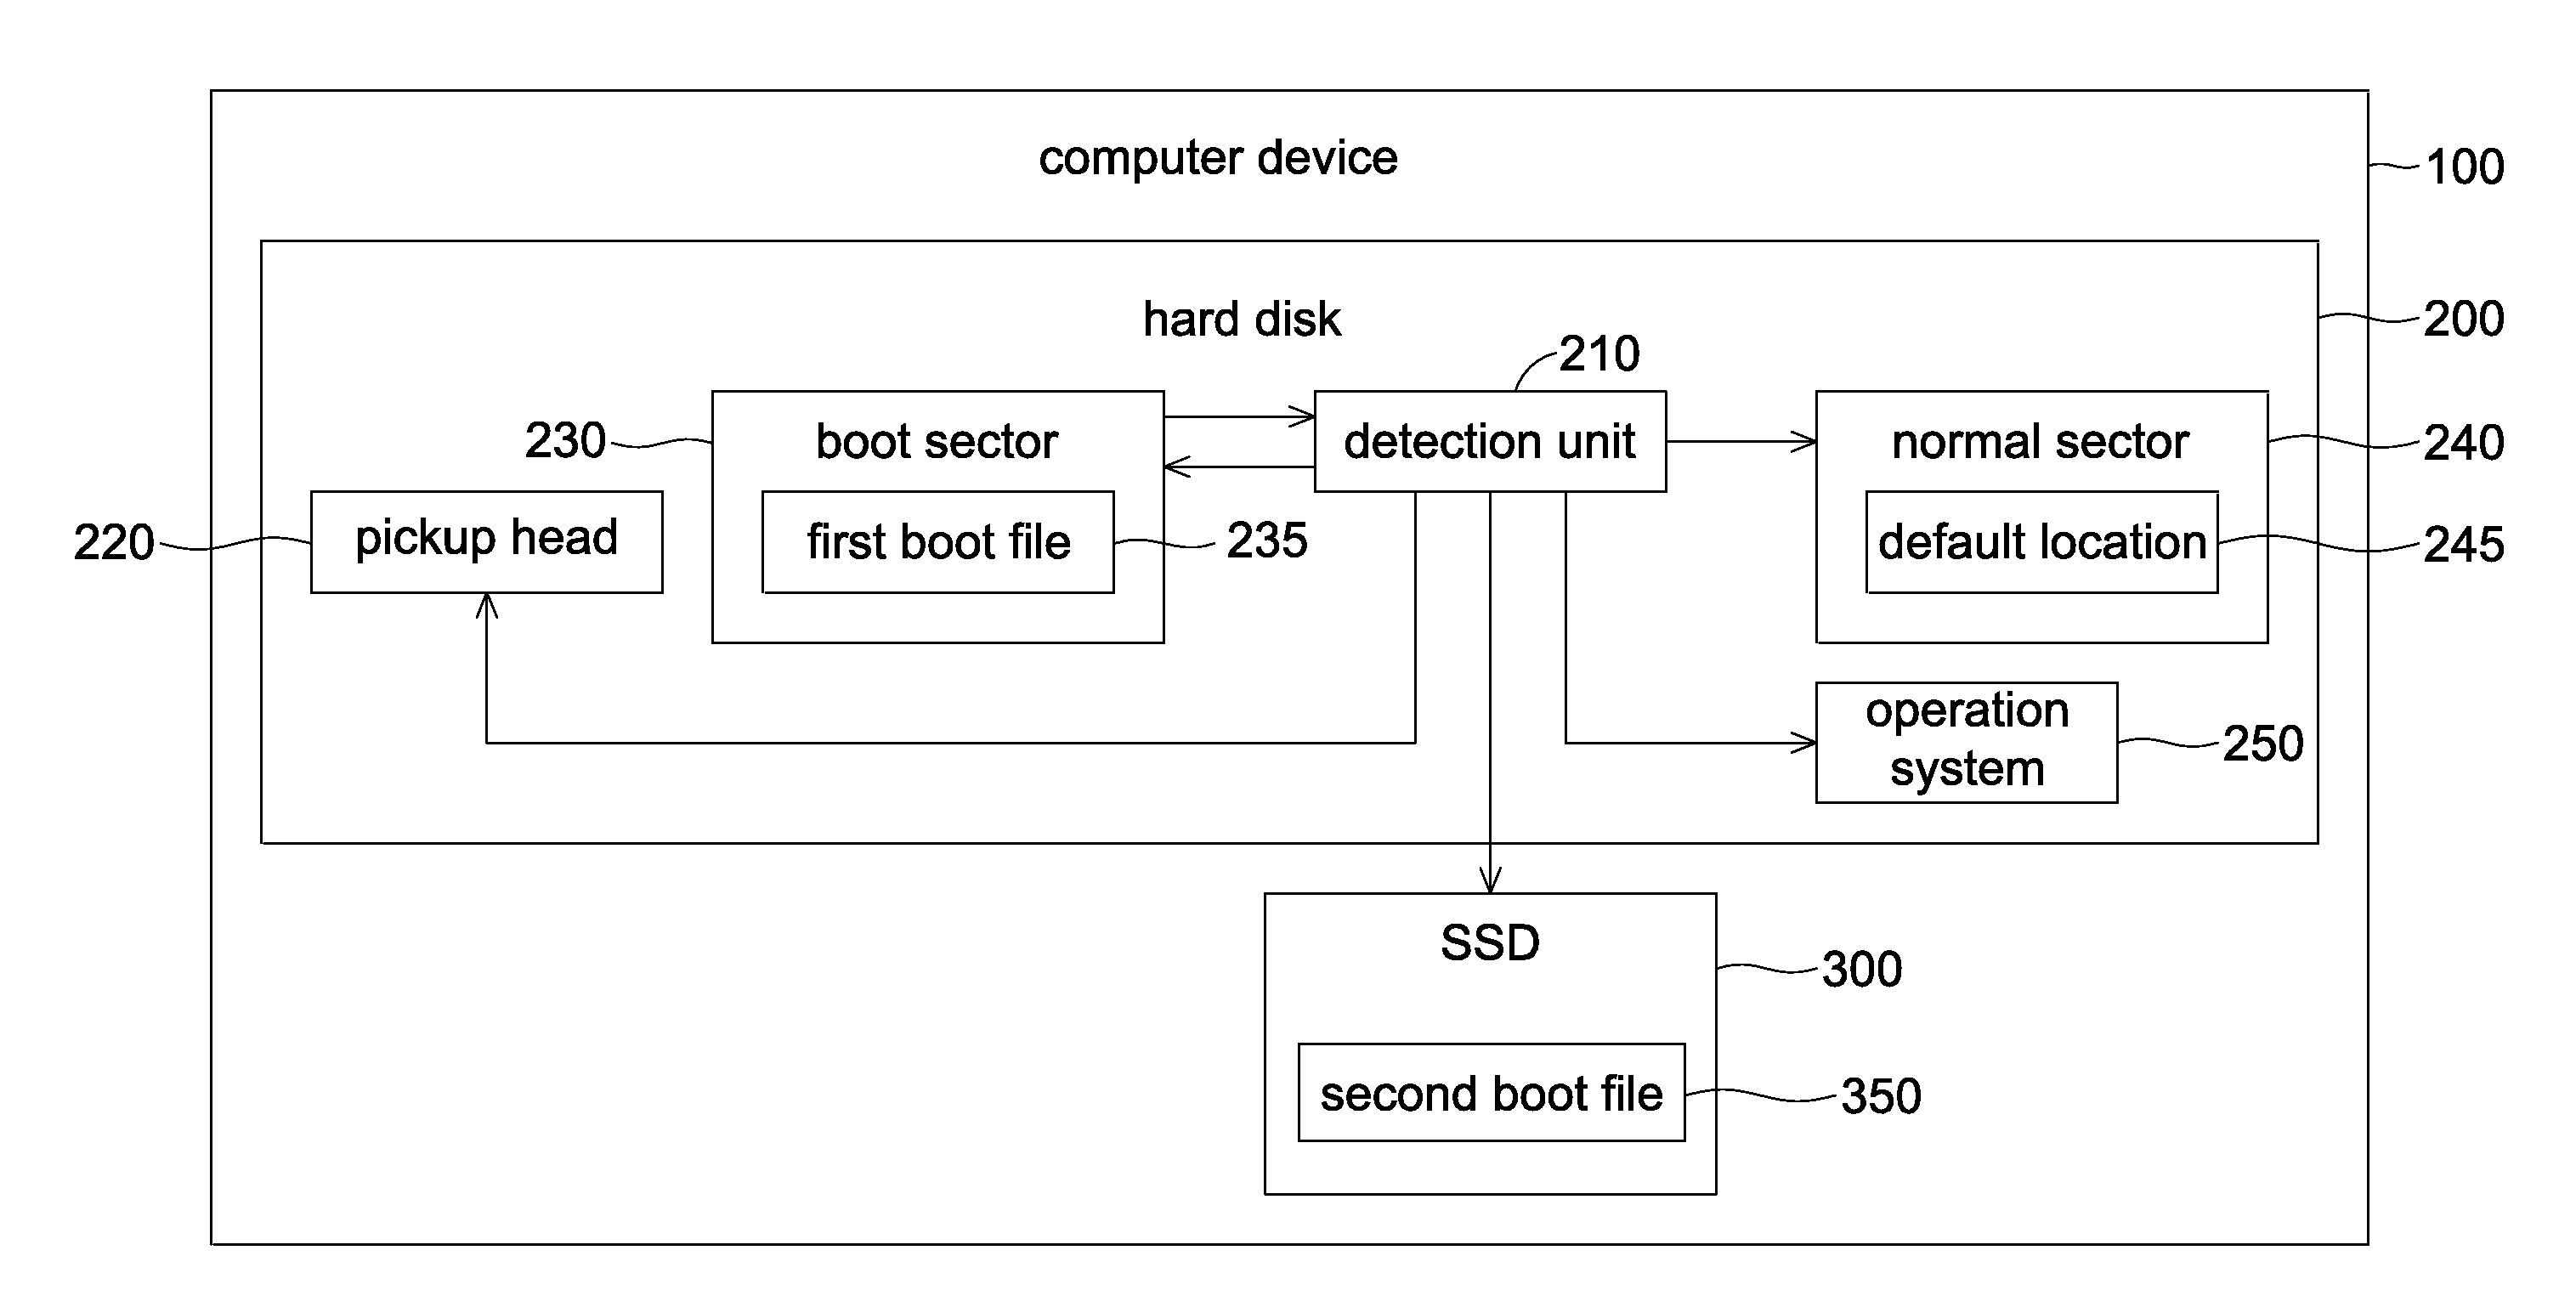 Boot method under boot sector failure in hard disk and computer device using the same